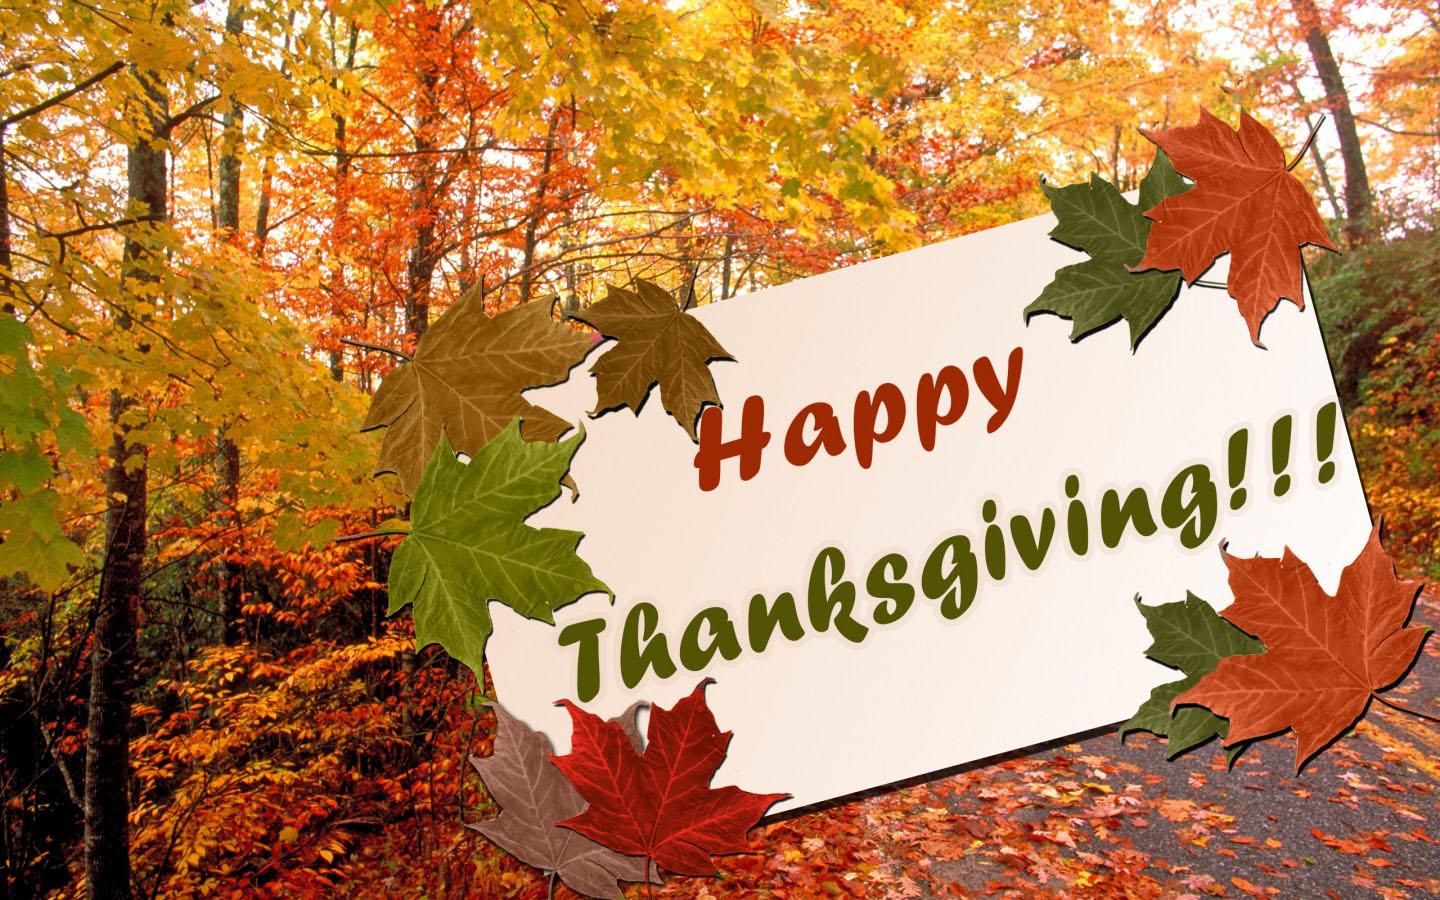 Thanksgiving Wallpaper - Android Apps on Google Play